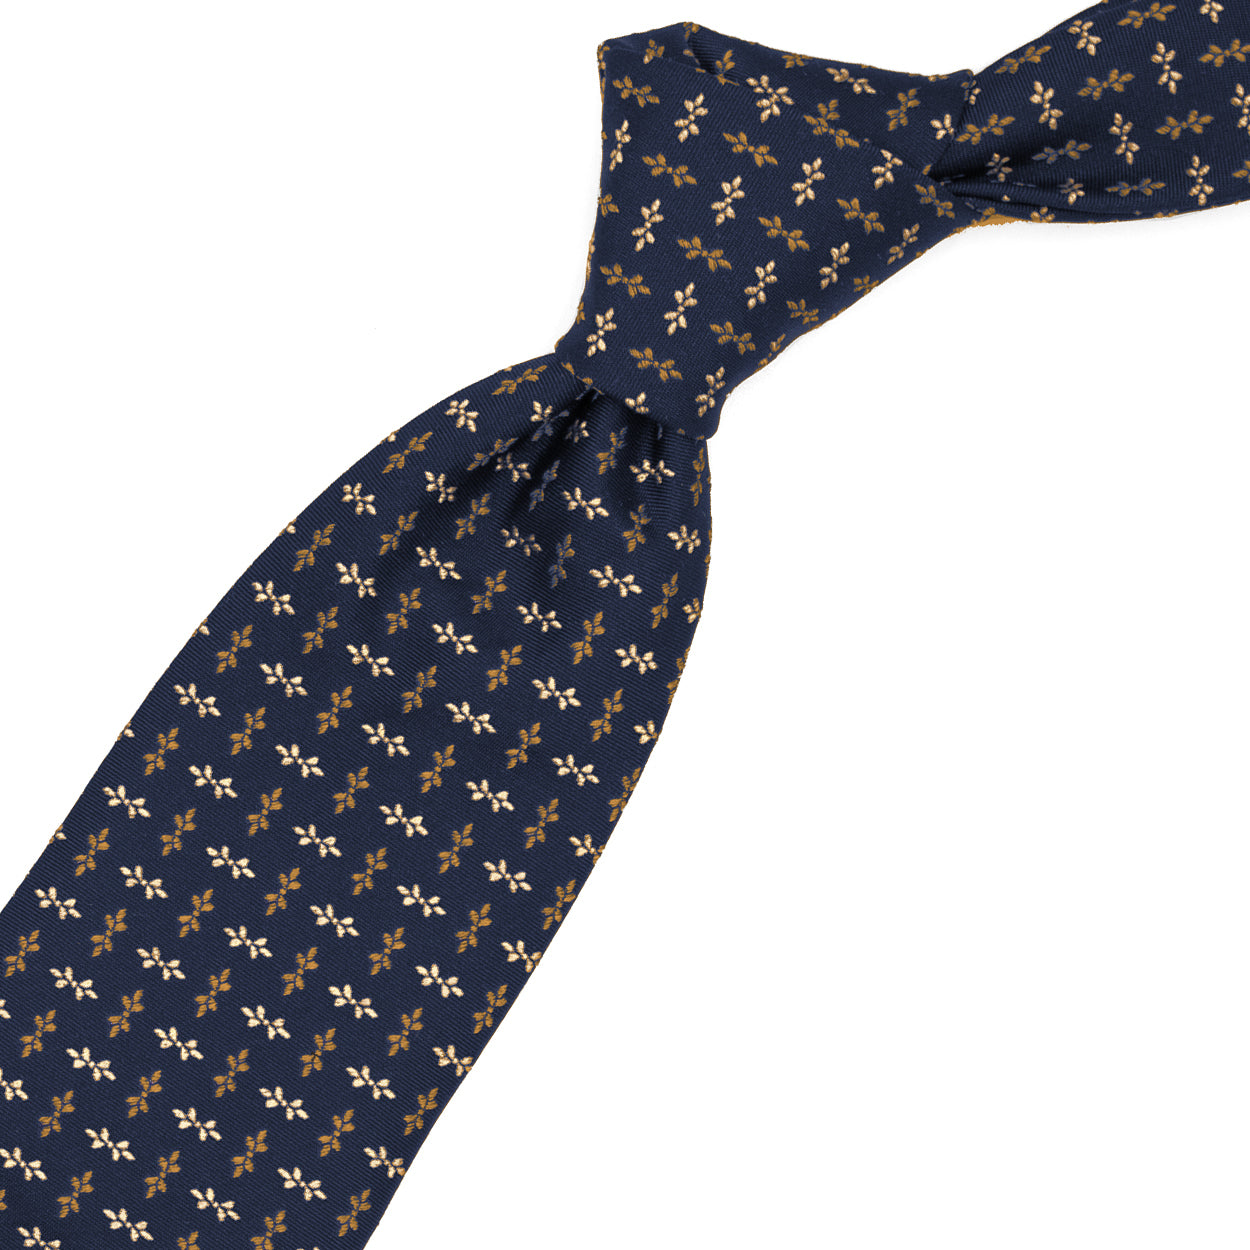 Blue tie with white and brown flowers